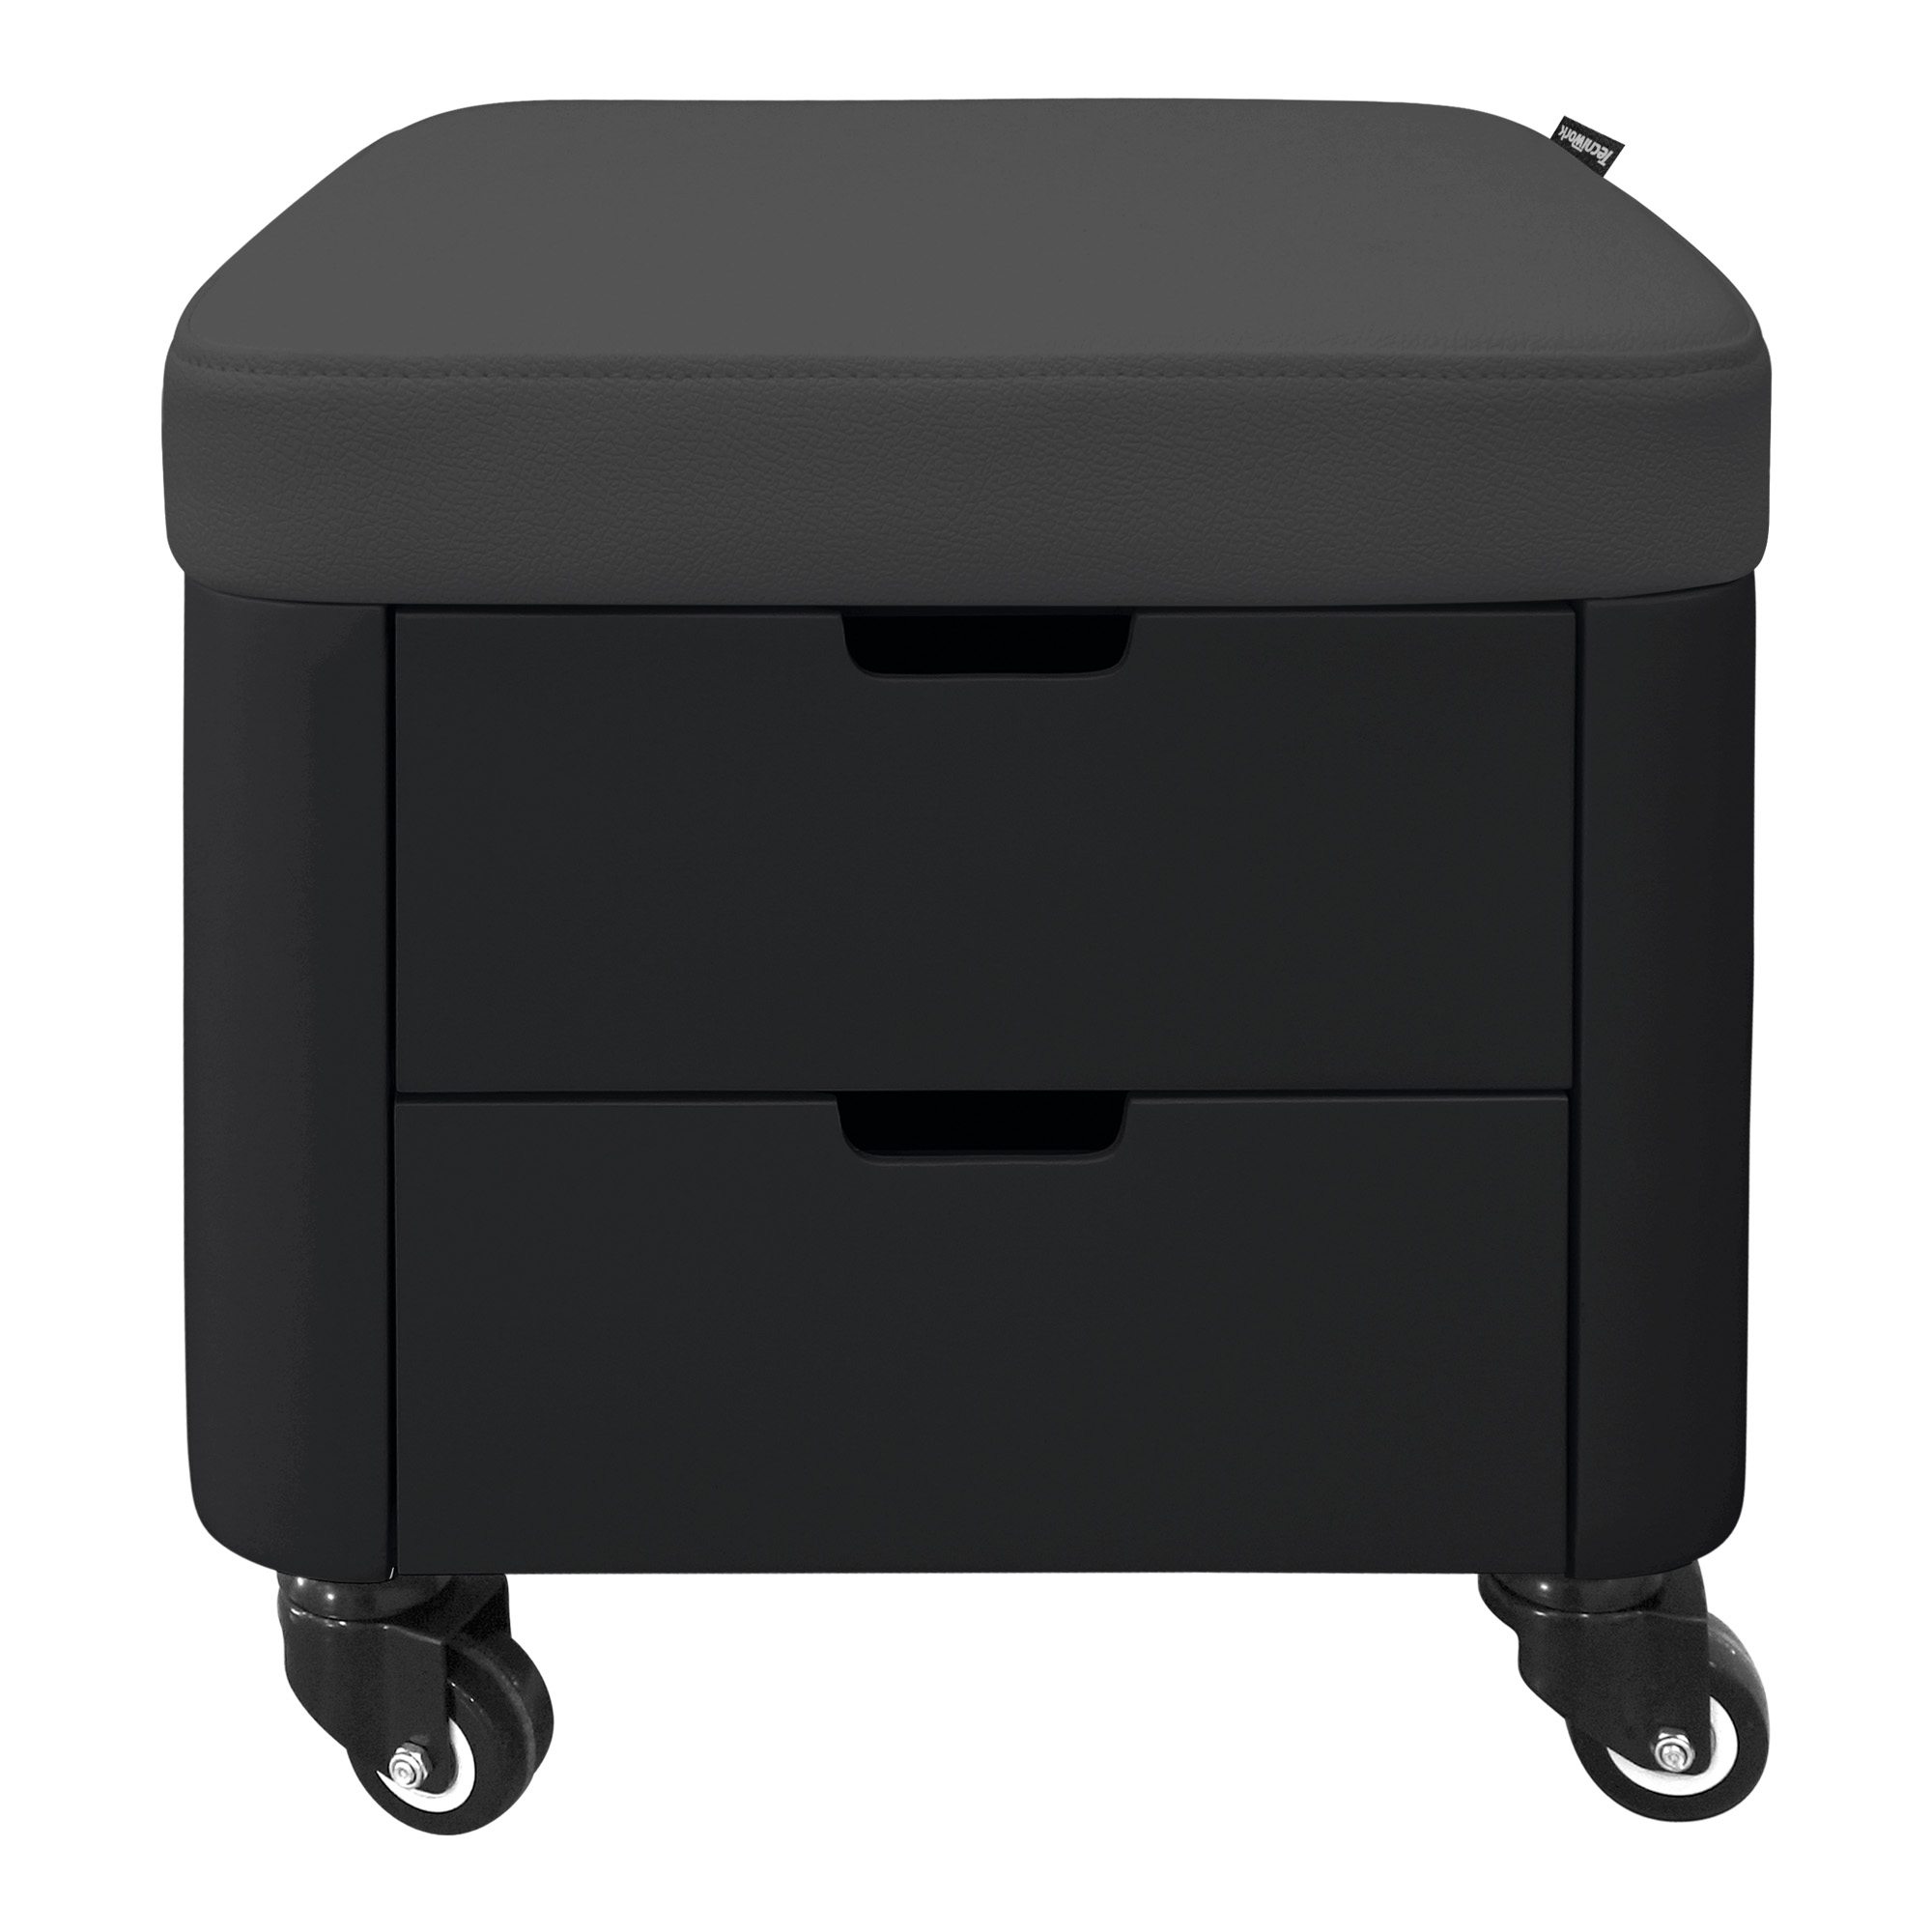 Manicure and pedicure chair with 2 drawers black